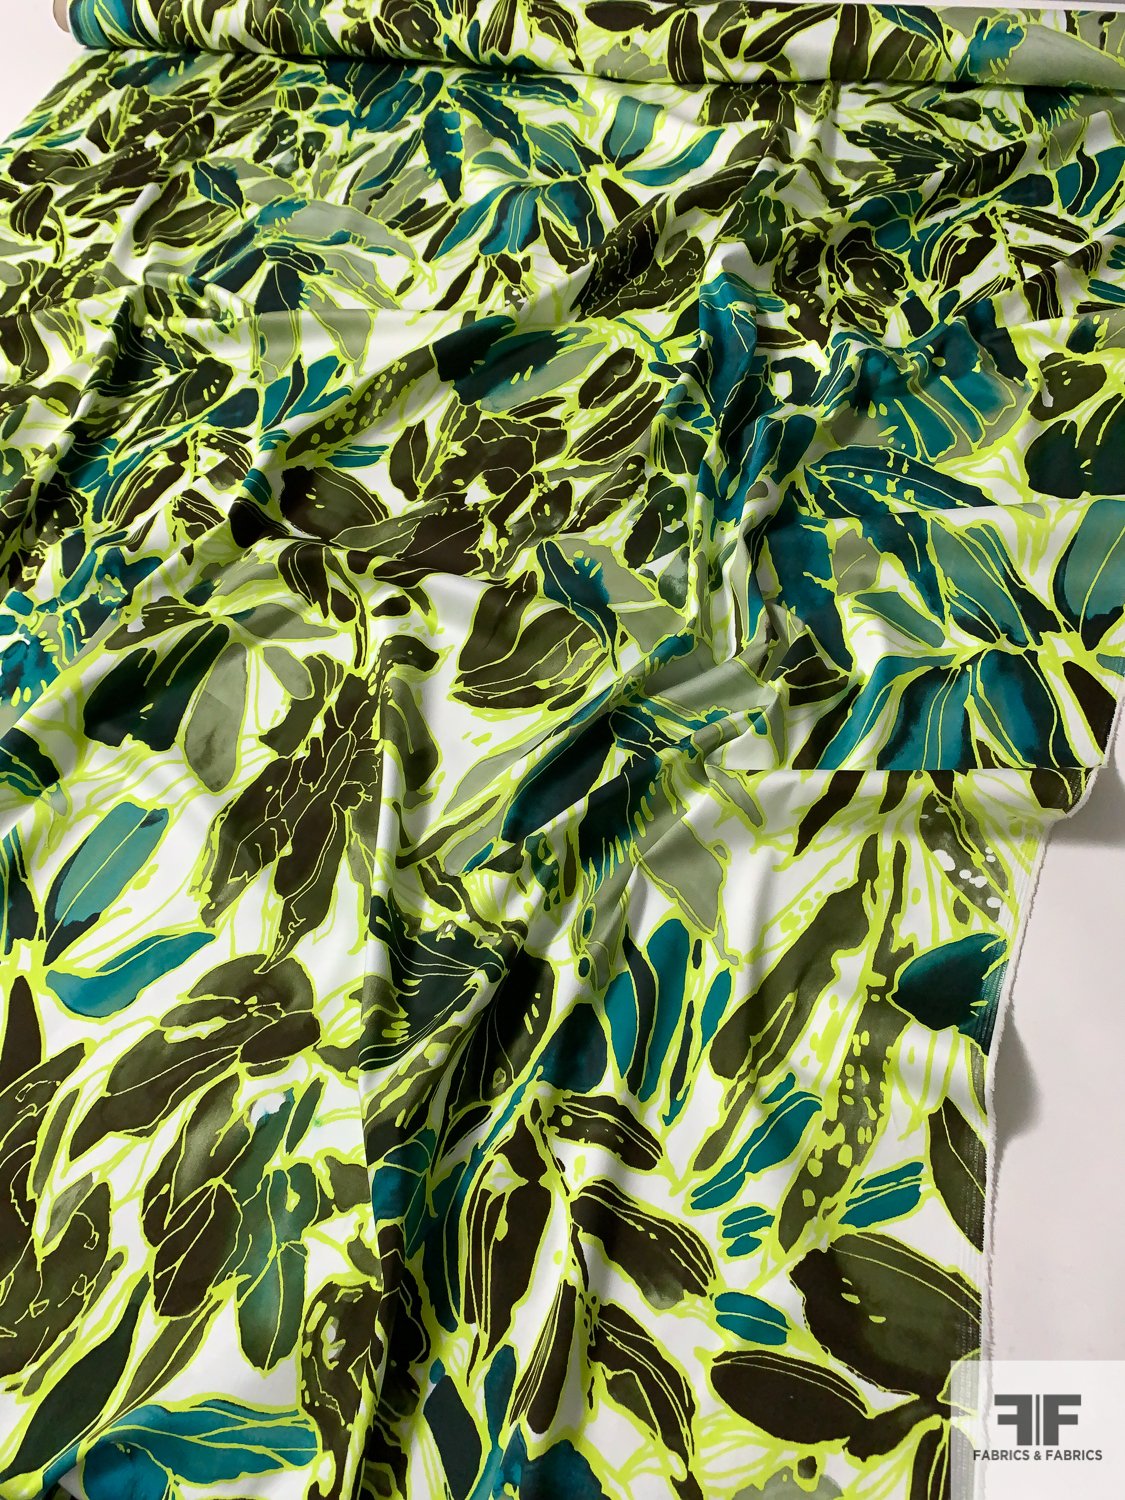 Exoticly Floral Printed Stretch Cotton Sateen - Shades of Green